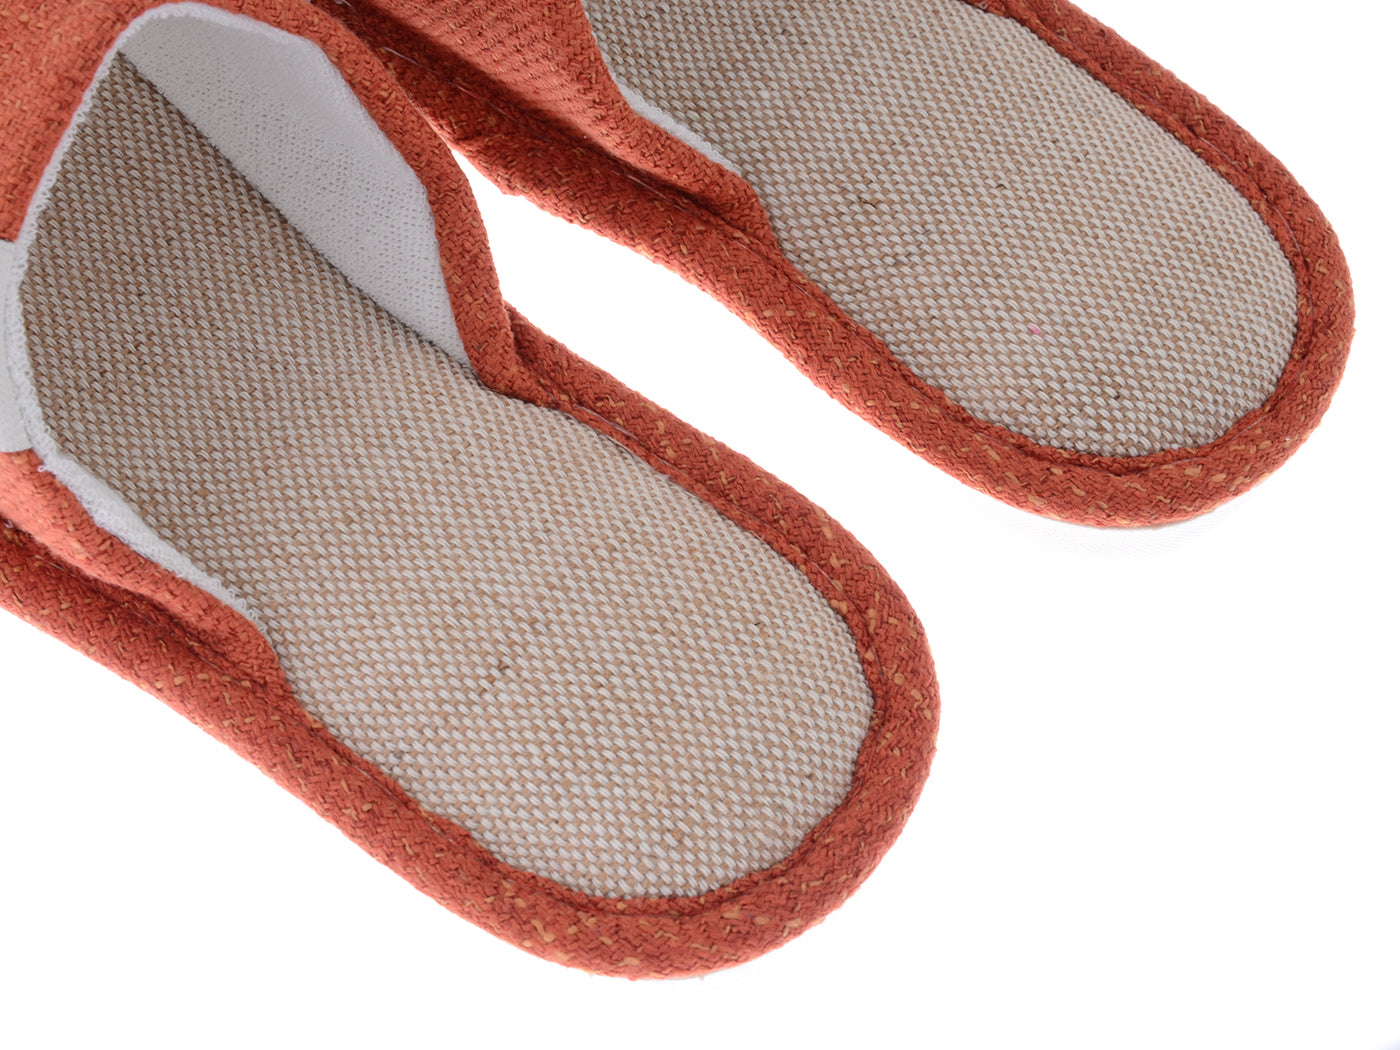 Home Slippers | Cotton & Linen